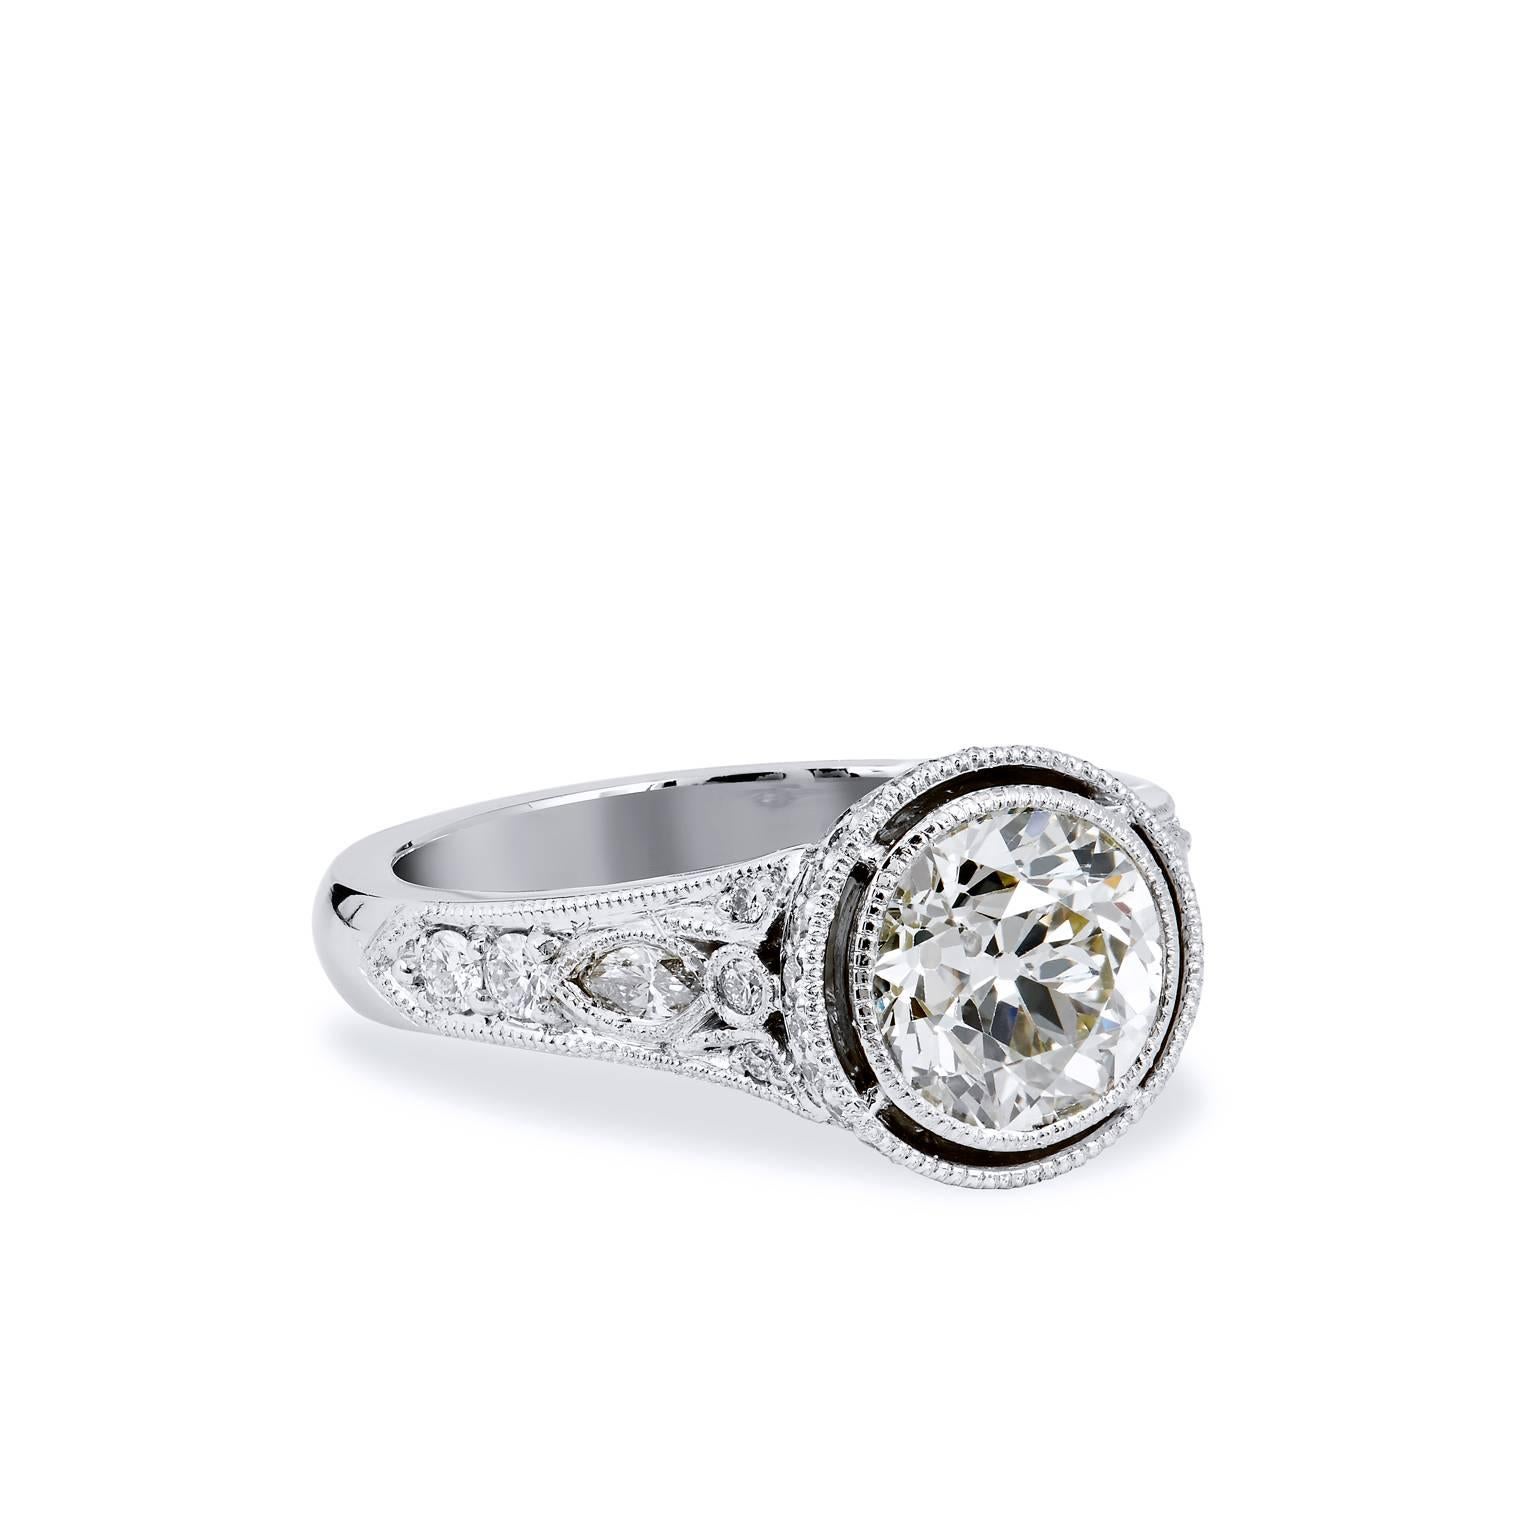 1.76 carat Bezel Set Diamond with Pave & Marquis Platinum Engagement Ring

This is a handmade ring by H&H Jewels.  It evokes the feeling of yesteryear with this lovely platinum and Old European cut diamond engagement ring.  A hand-cut 1.76 carat Old